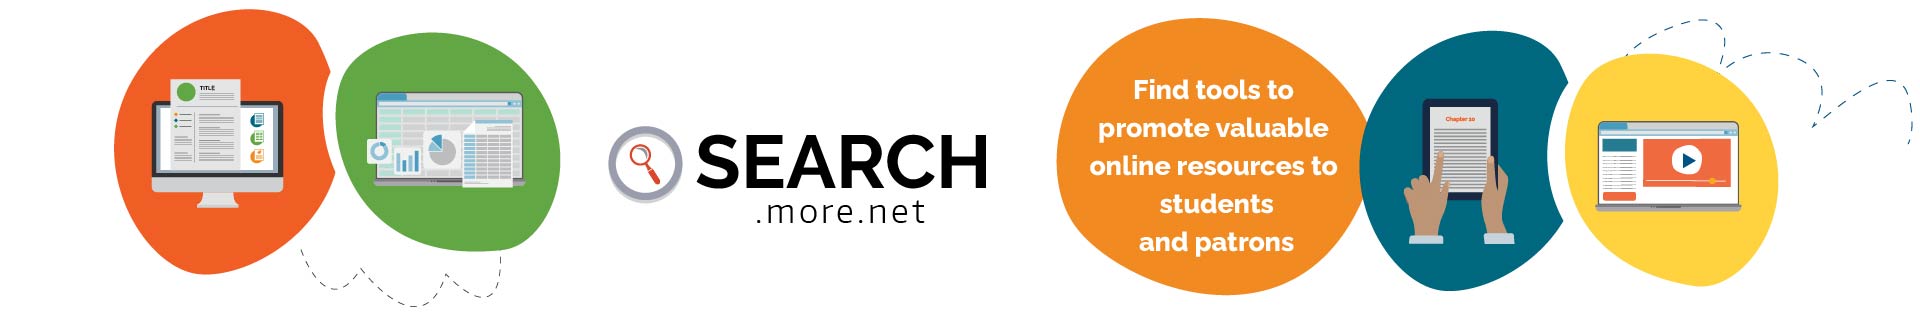 search.more.net, Resources to promote online resources to patrons and students